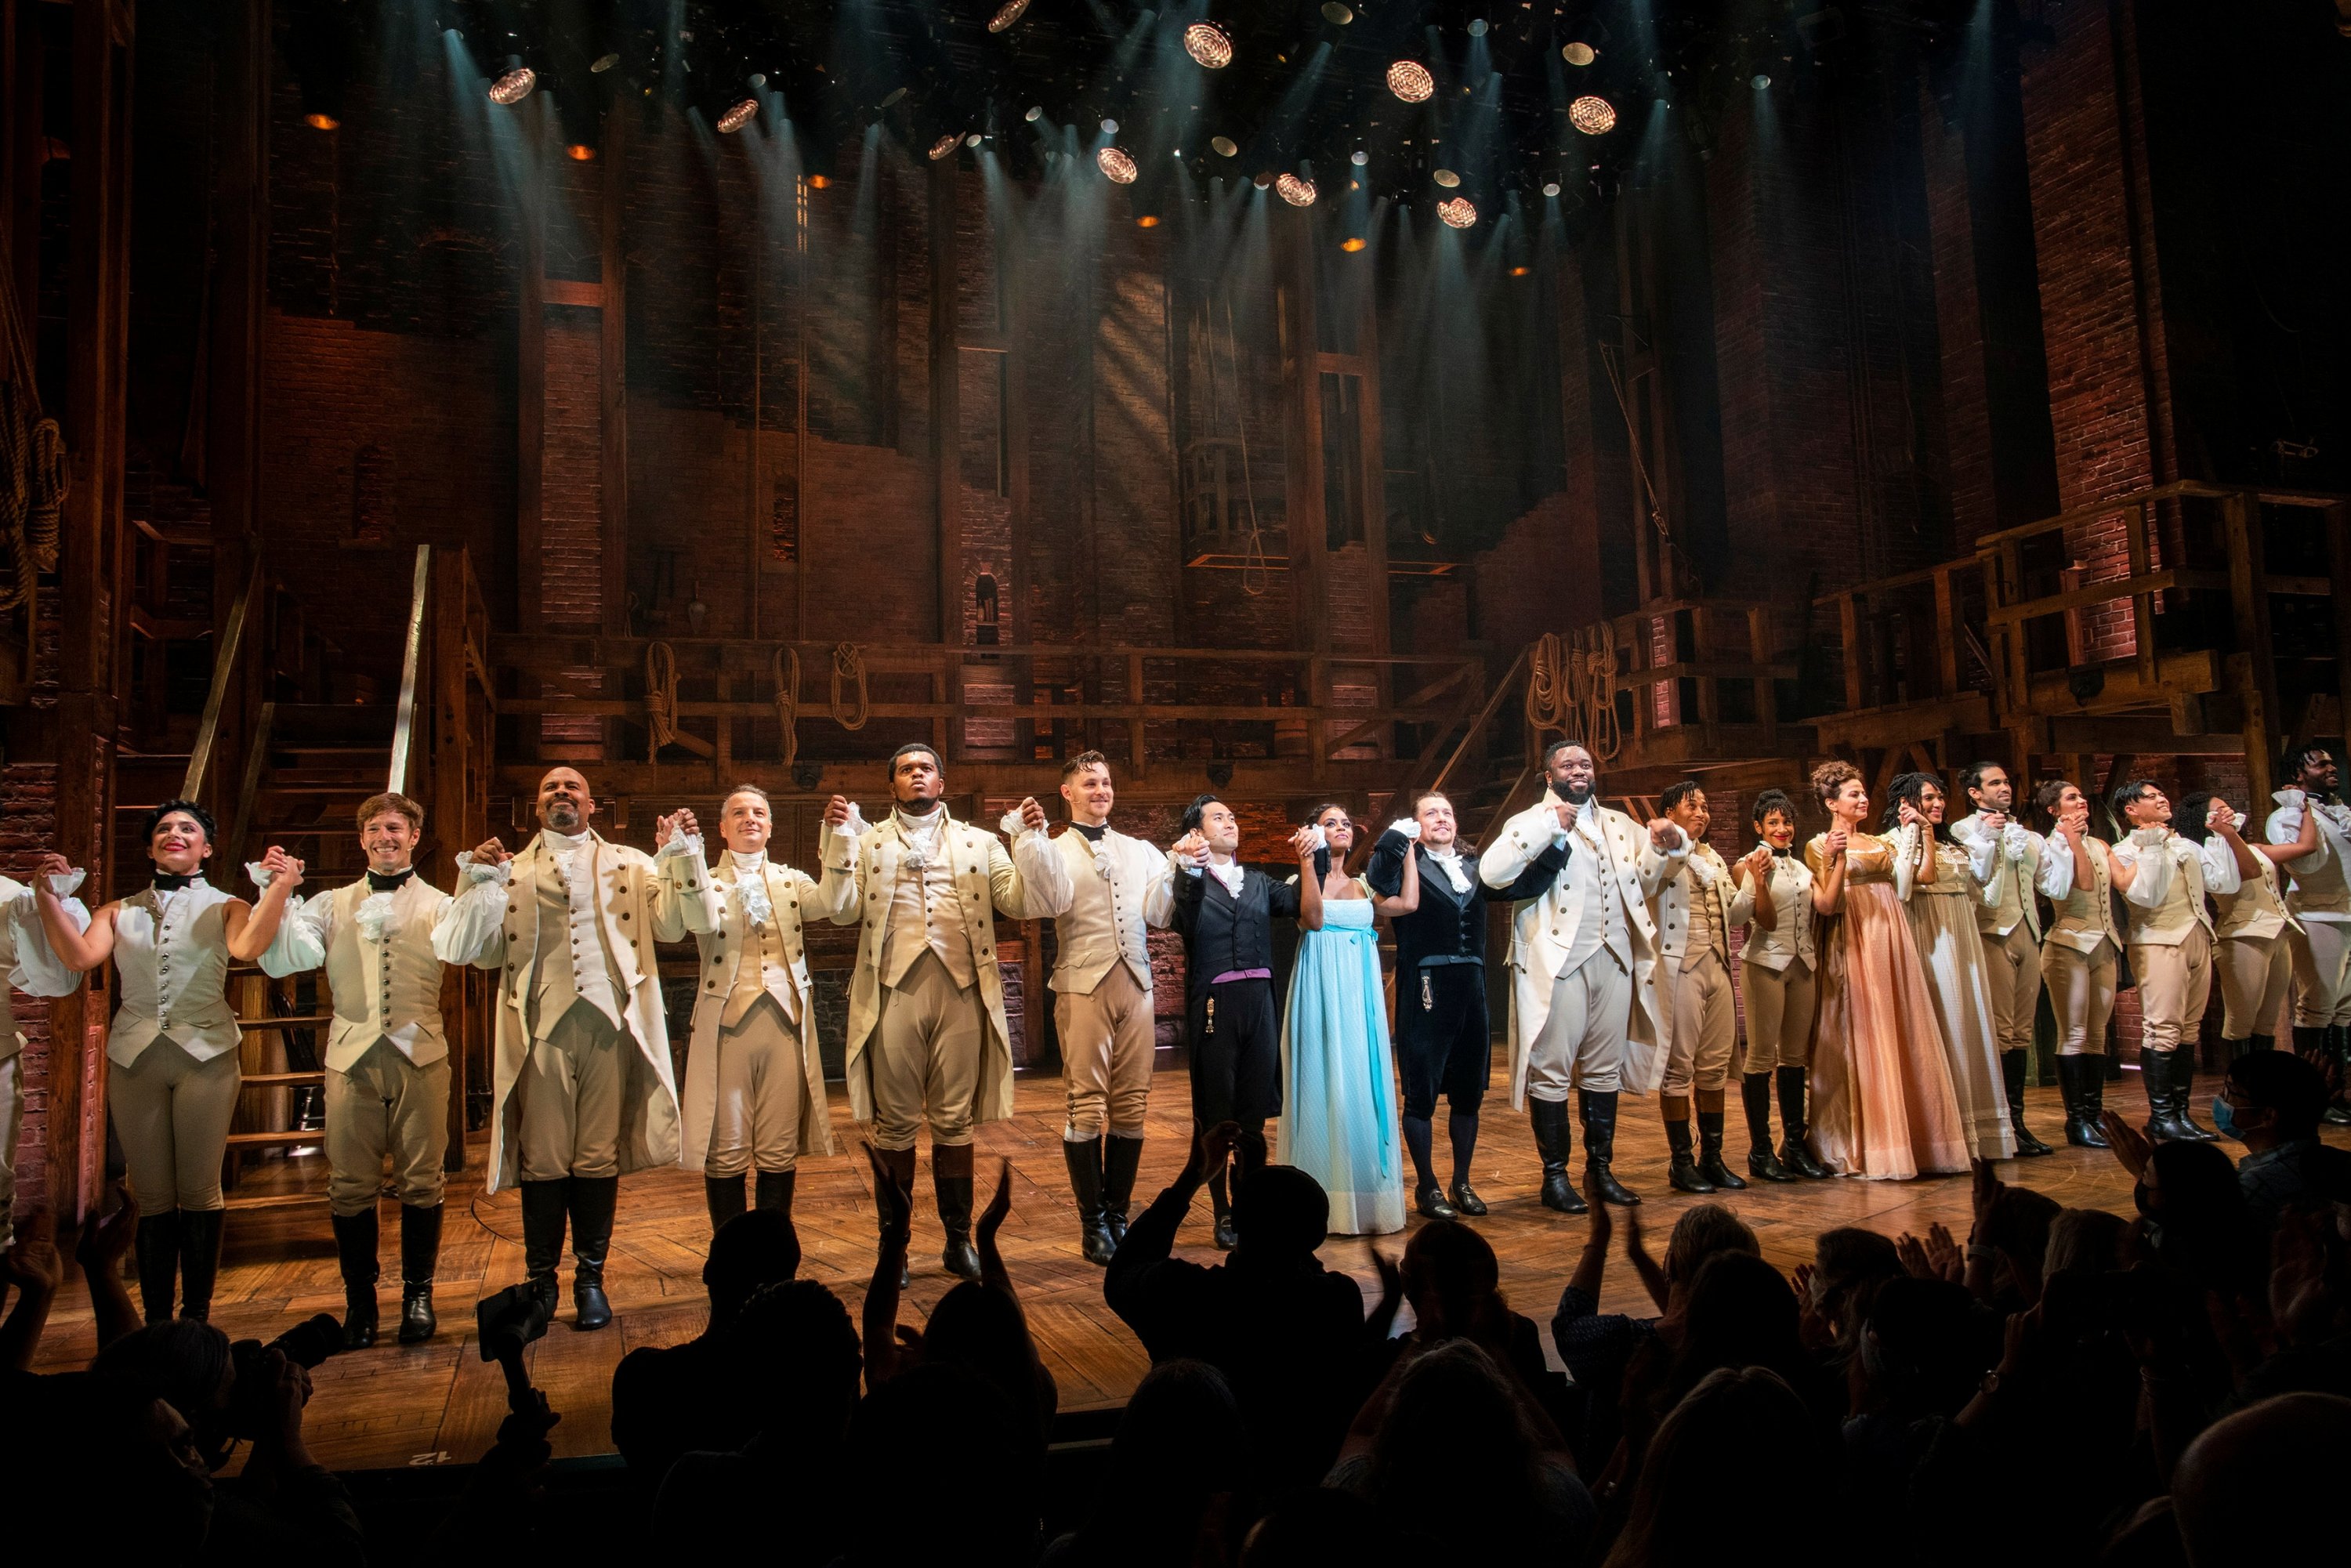 Actors greet the audience at the Richard Rogers theater during curtain call of the first return performance of "Hamilton" as Broadway shows begin to re-open to live audiences, in Manhattan, New York, U.S., Sept. 14, 2021. (Reuters Photo)